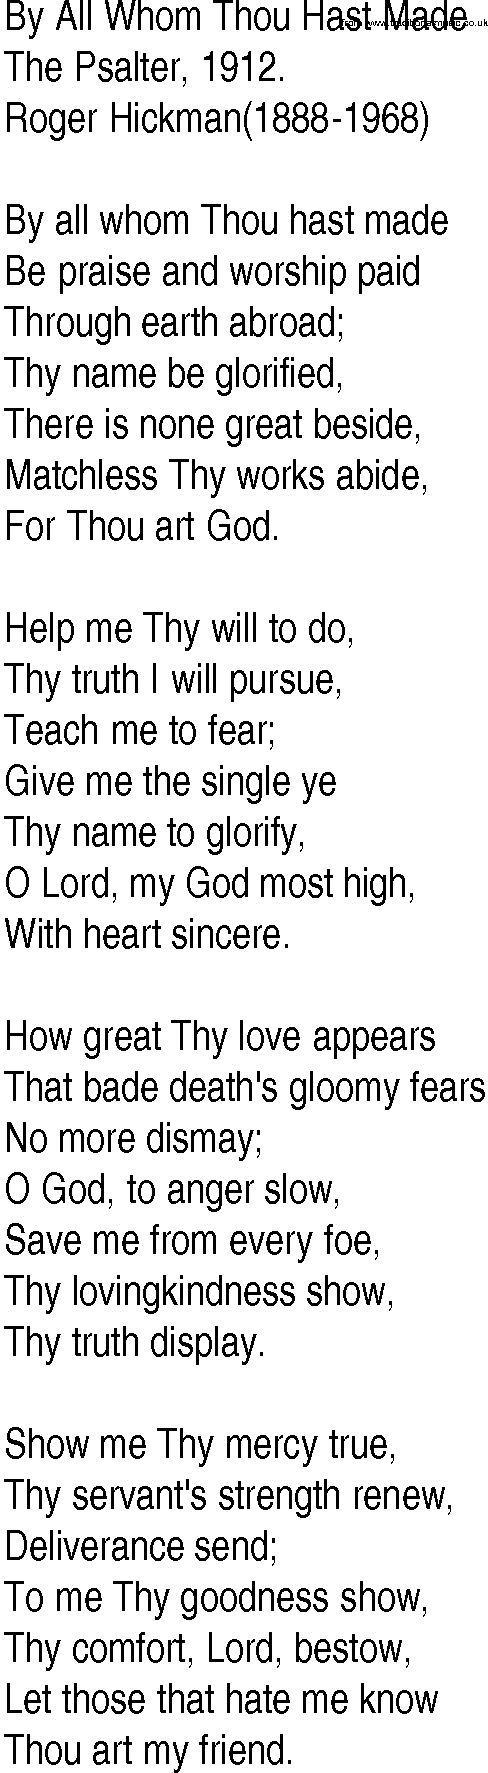 Hymn and Gospel Song: By All Whom Thou Hast Made by The Psalter lyrics